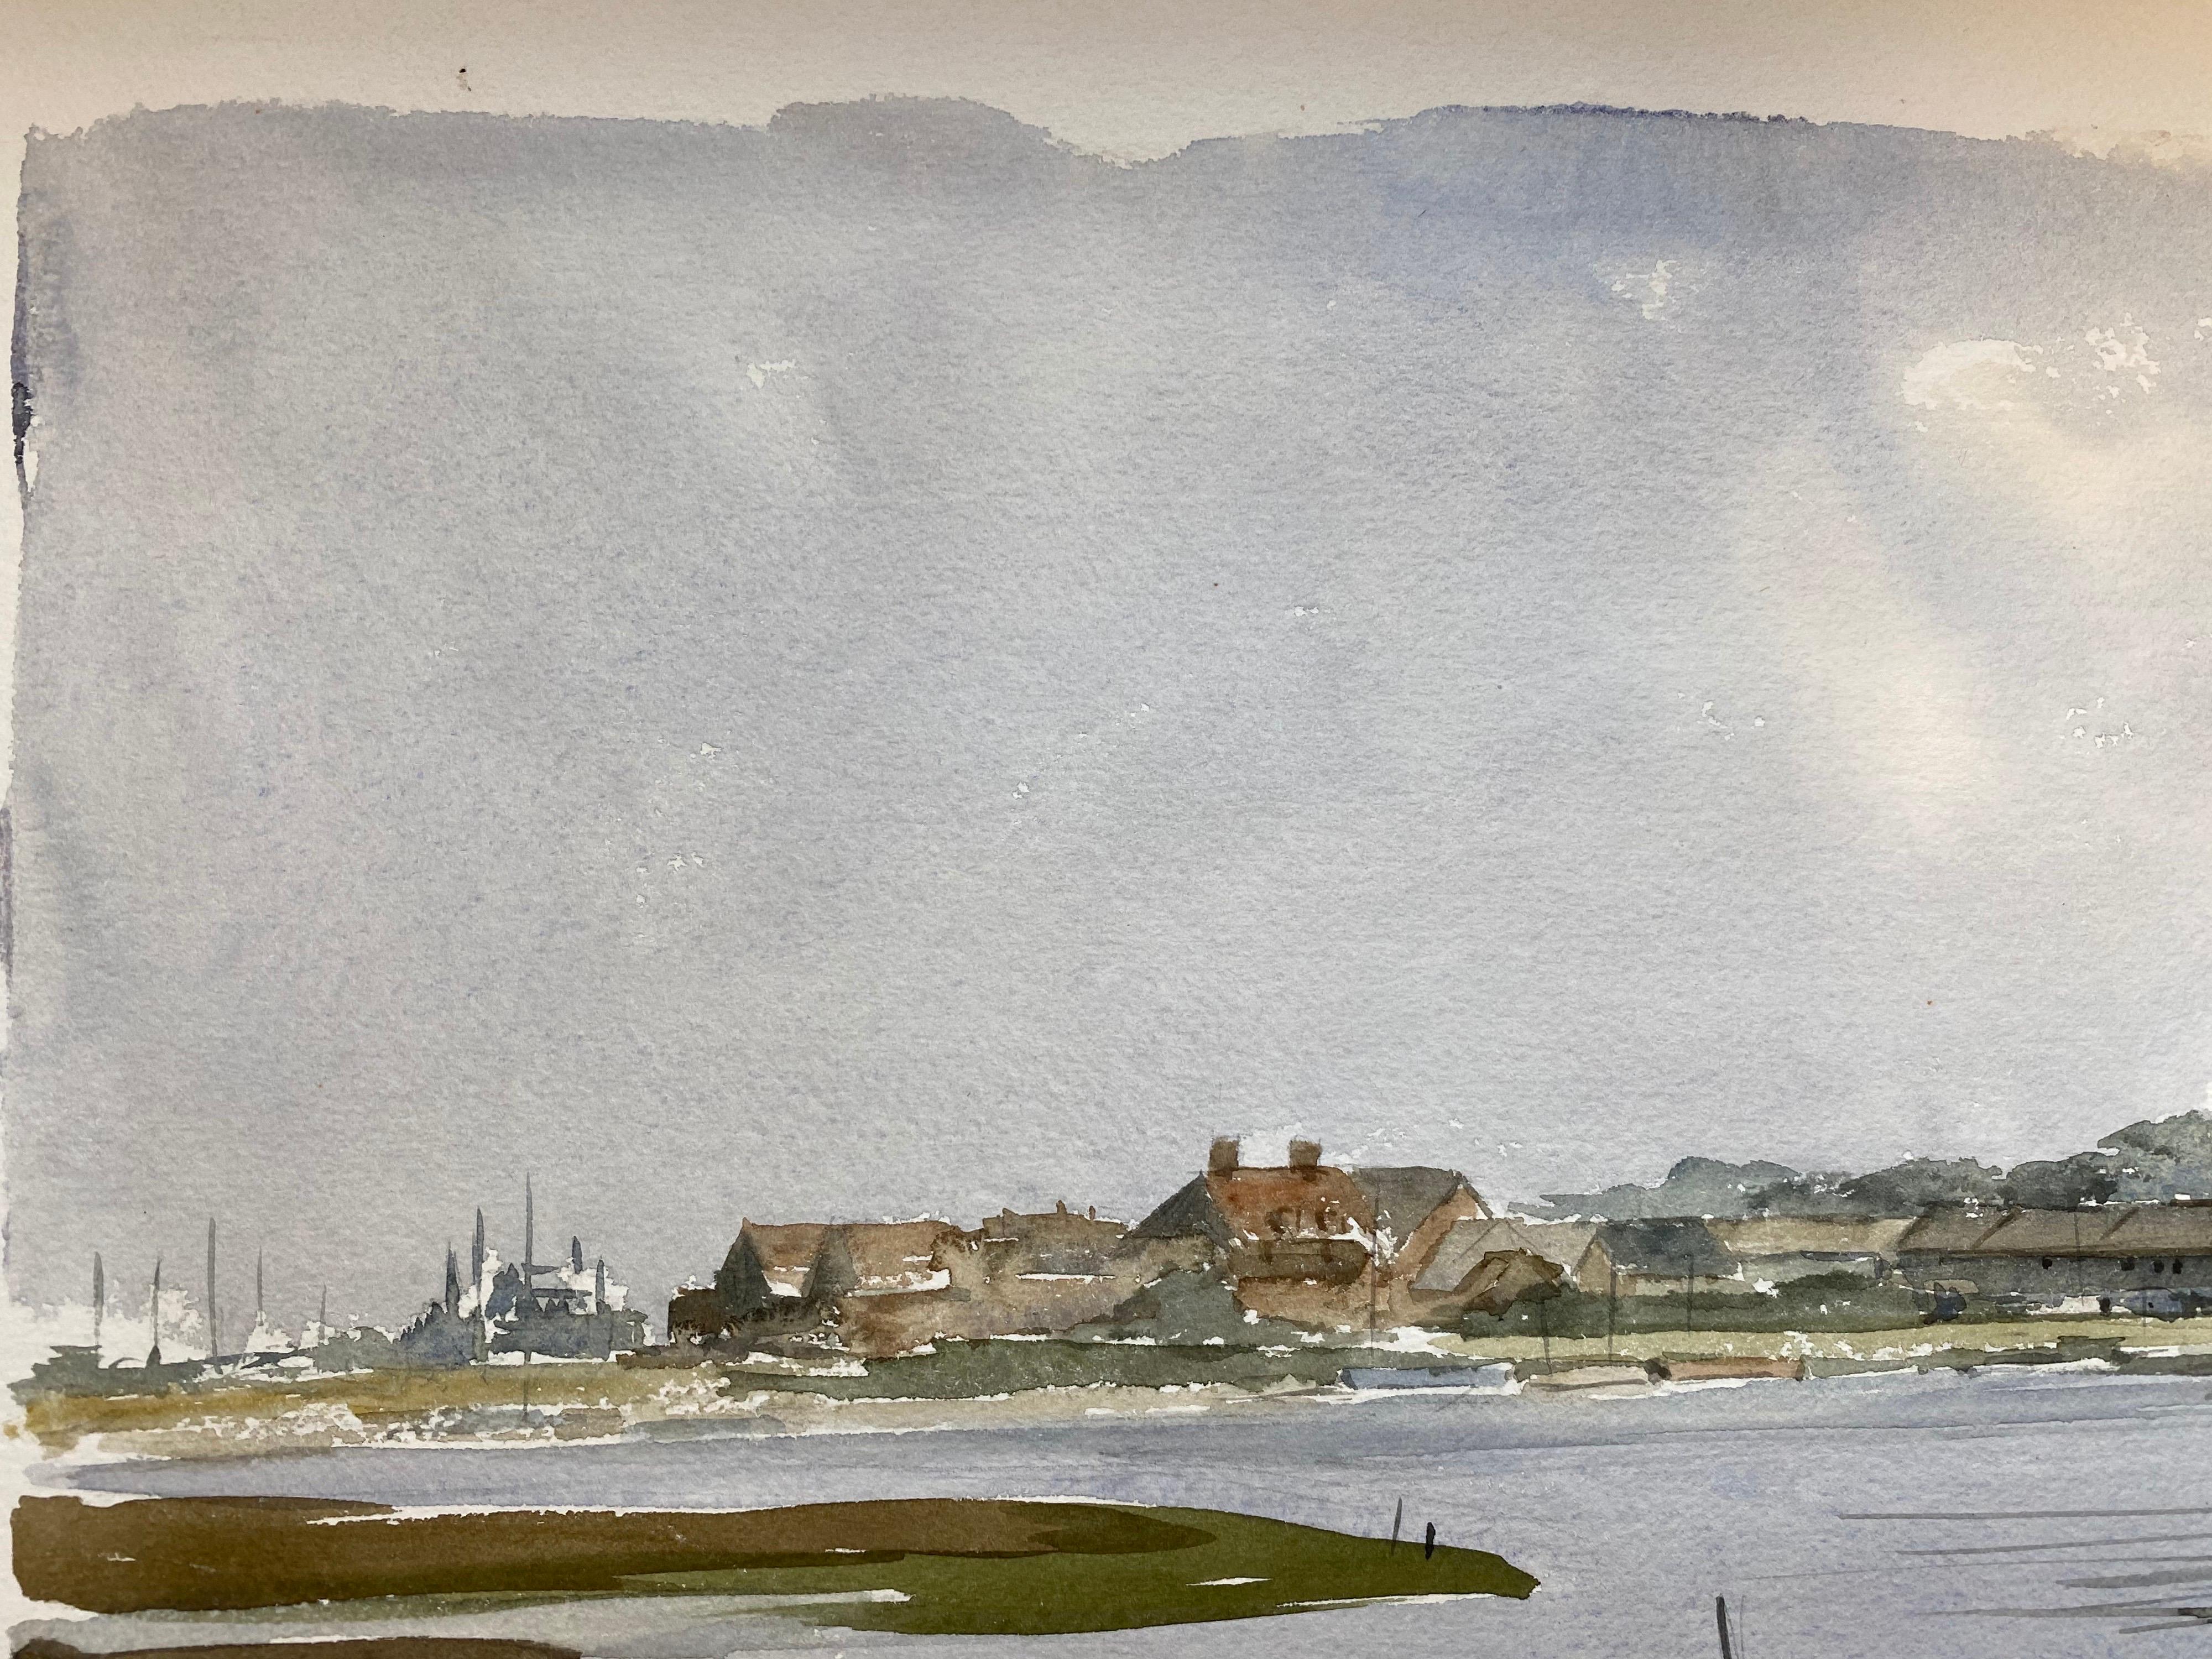 Yarmouth Town- Signed Original British Watercolour Painting - Gray Landscape Painting by Ronald Birch